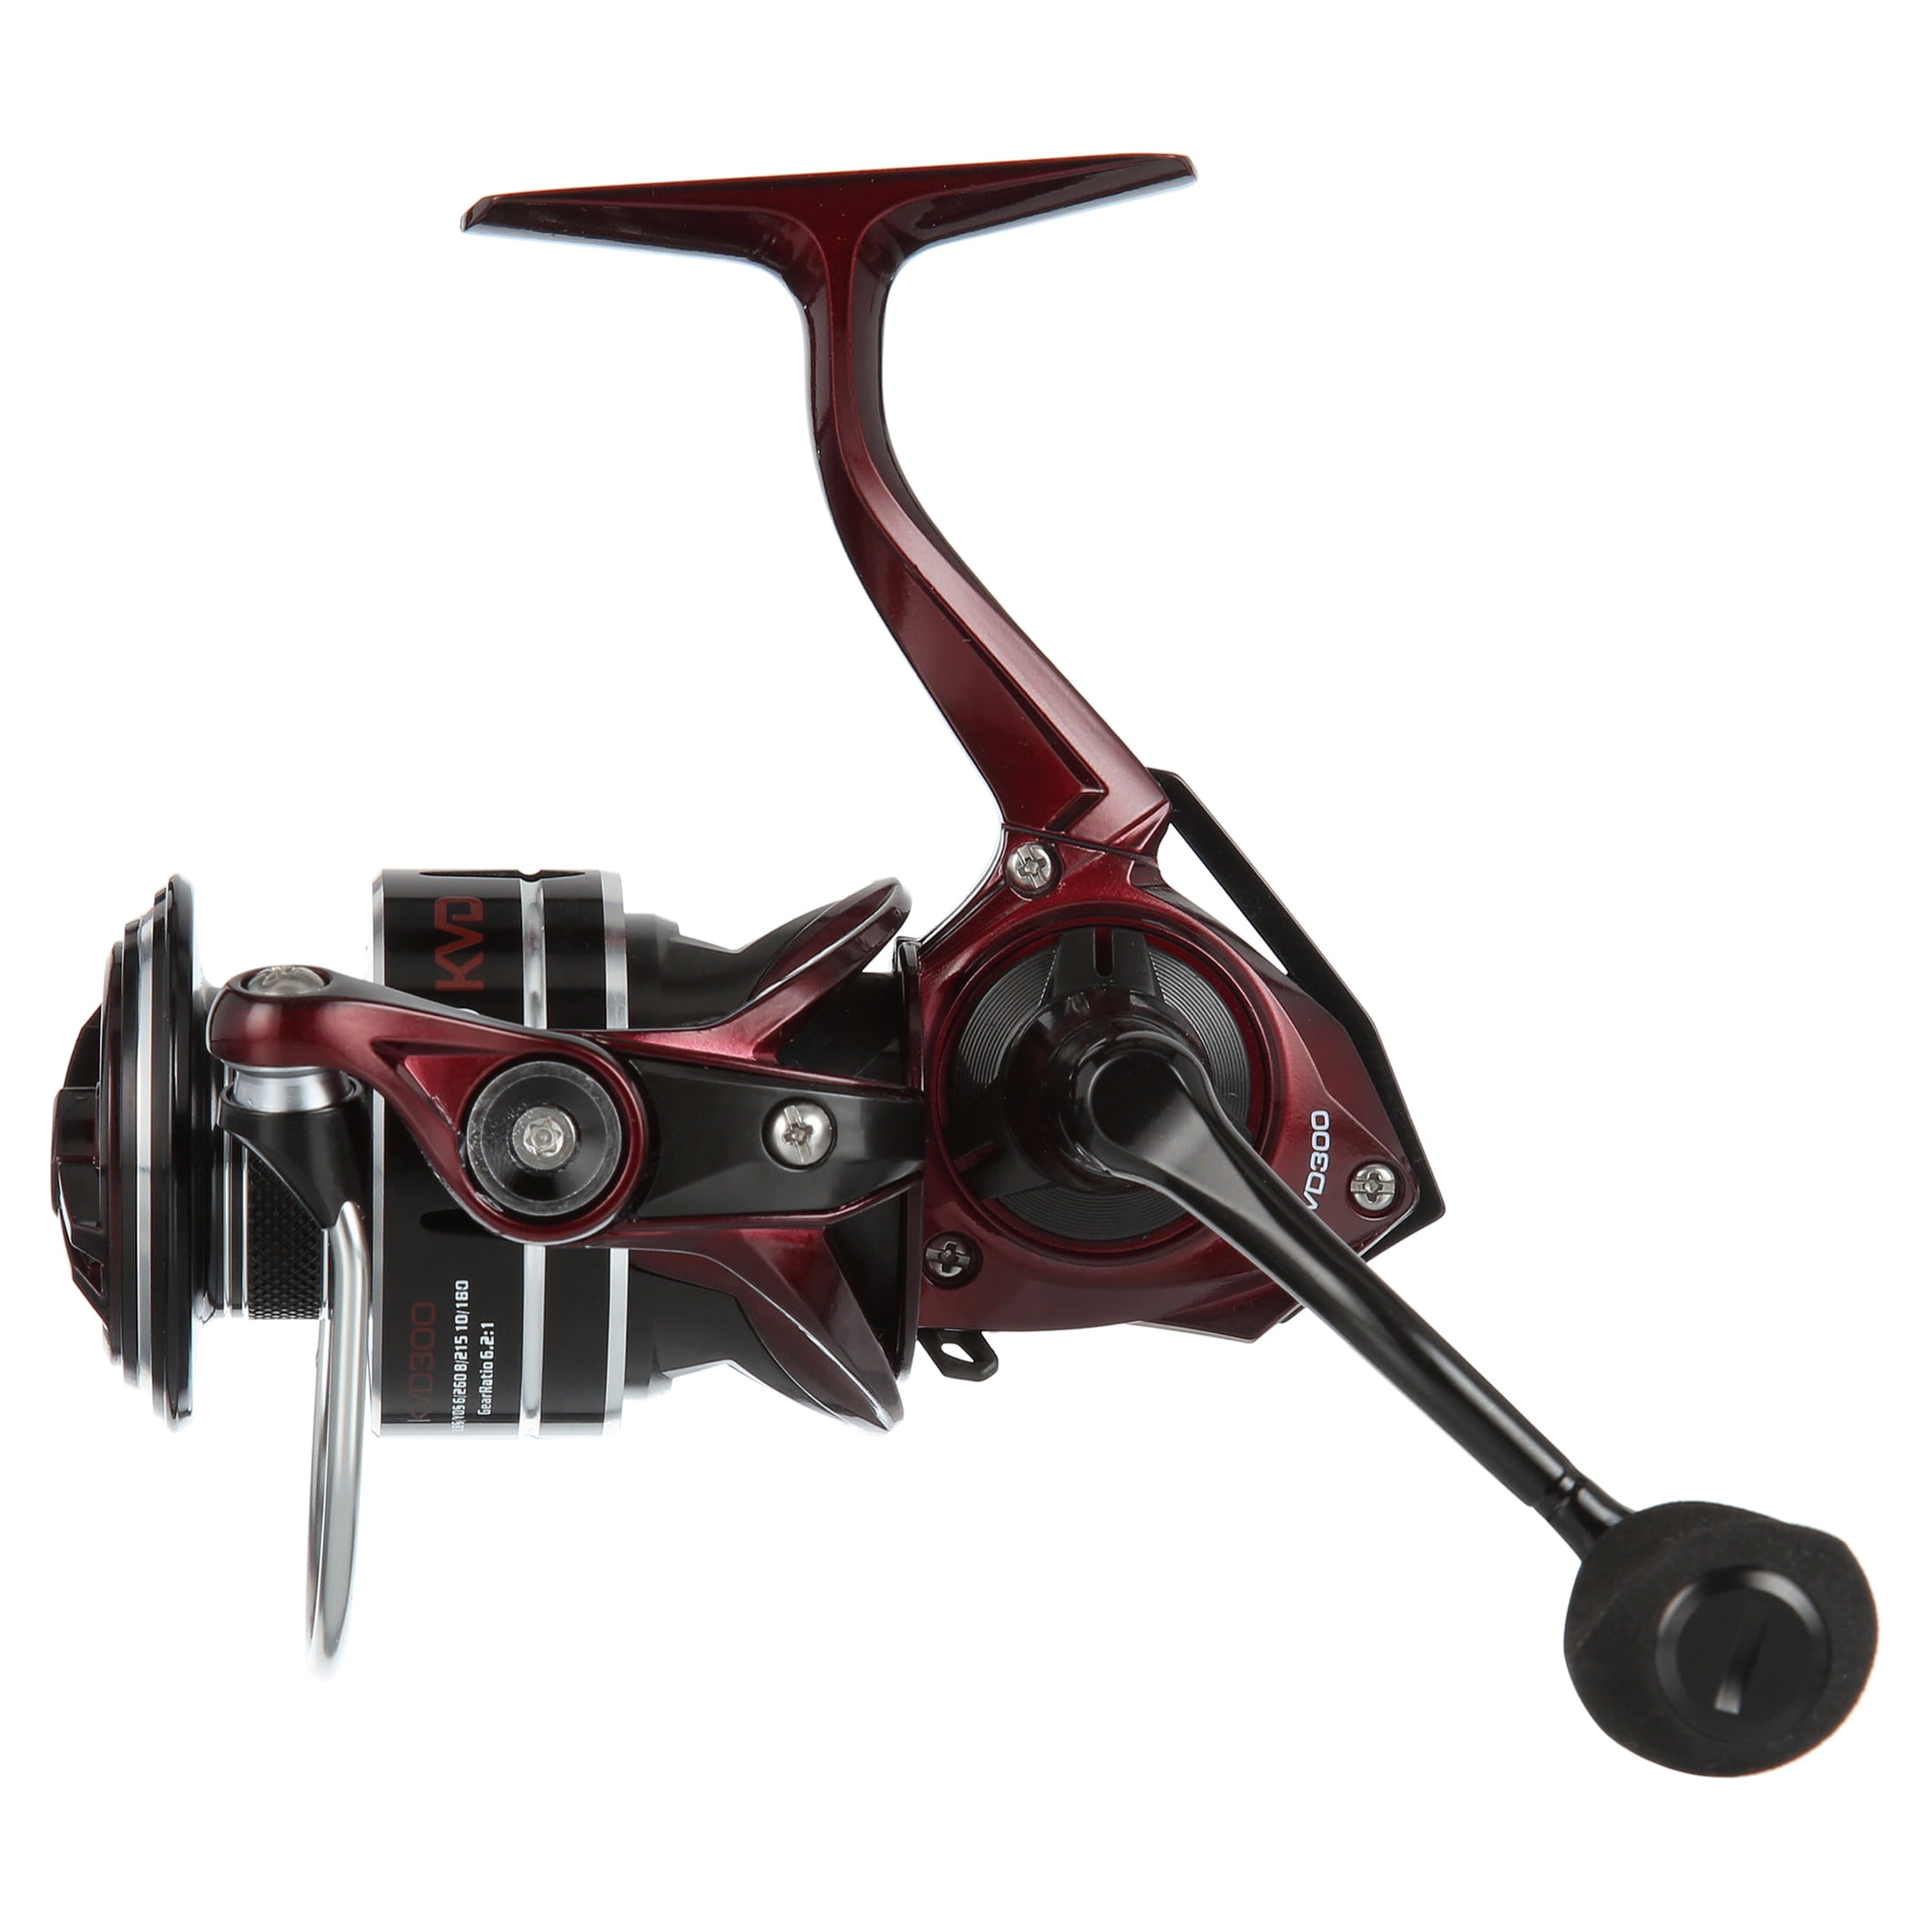 Lew's KVD 400 Spinning Reel, Maroon, one Size (KVD400) - リール